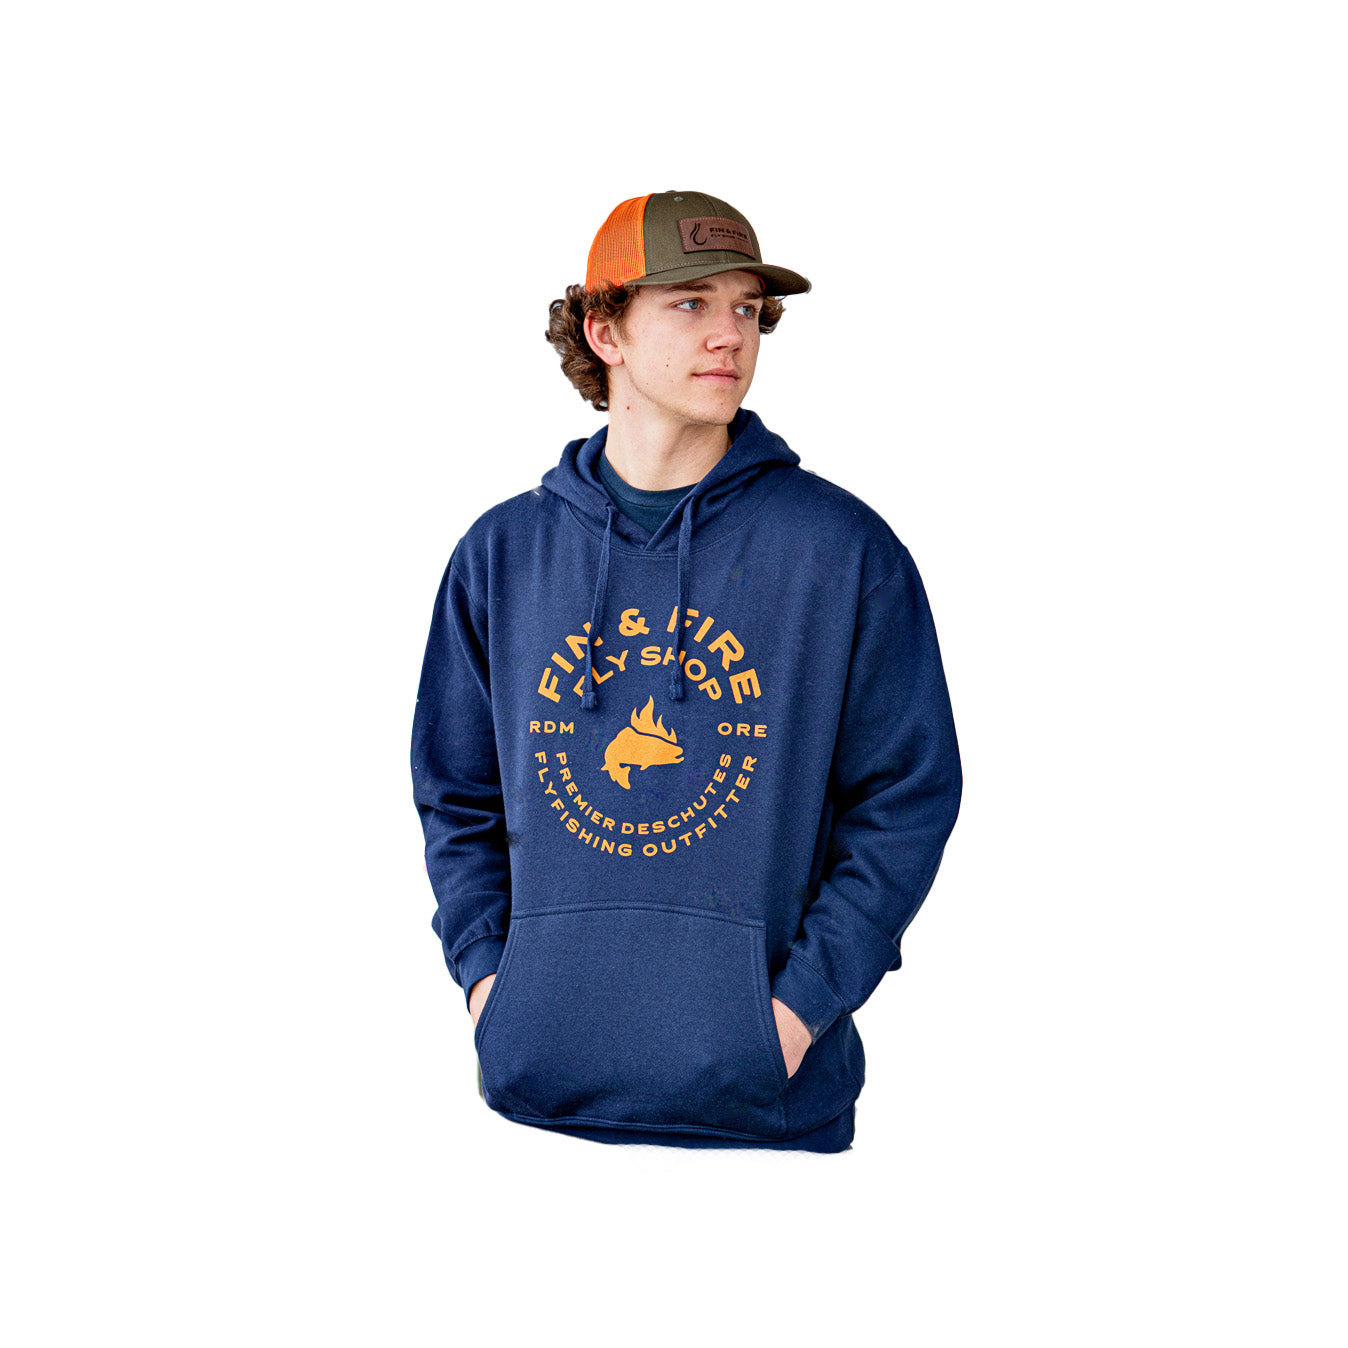 Mens Clothing Tagged Hoodies/Sweatshirts - Fin & Fire Fly Shop